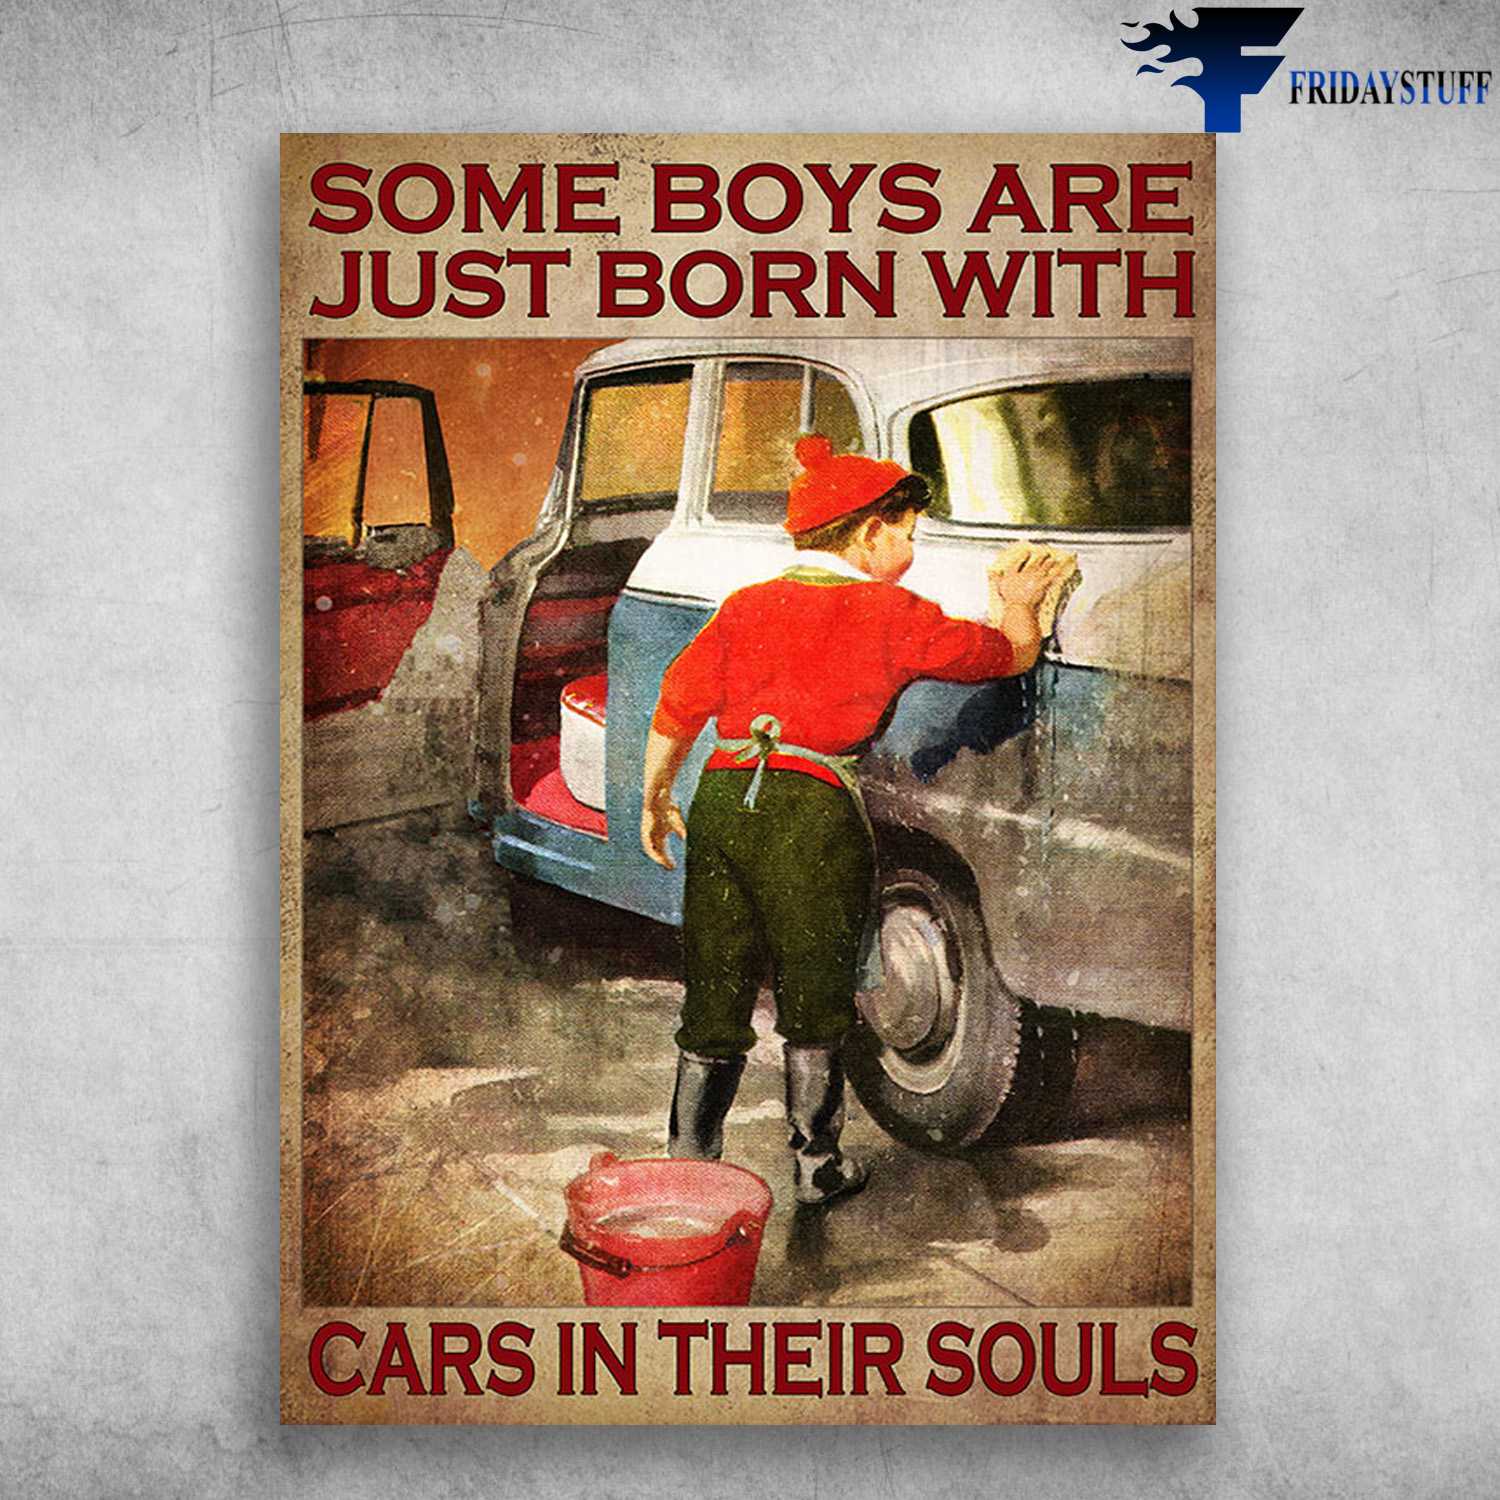 Car Washing - Some Boys Are Just Born With, Cars In Their Souls